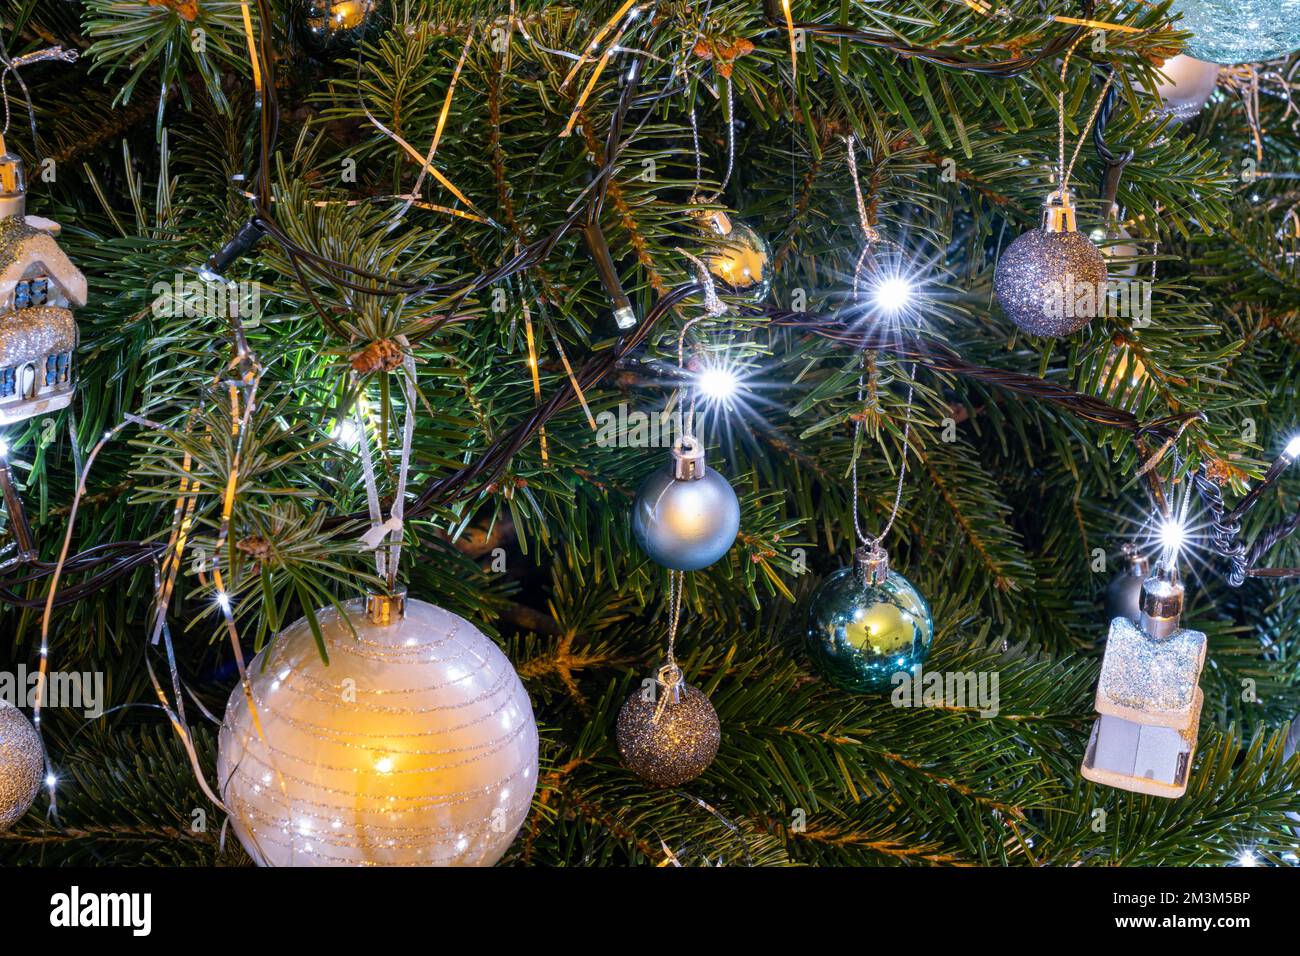 Closeup of a Christmas tree with bauble and light decorations with light stars Stock Photo